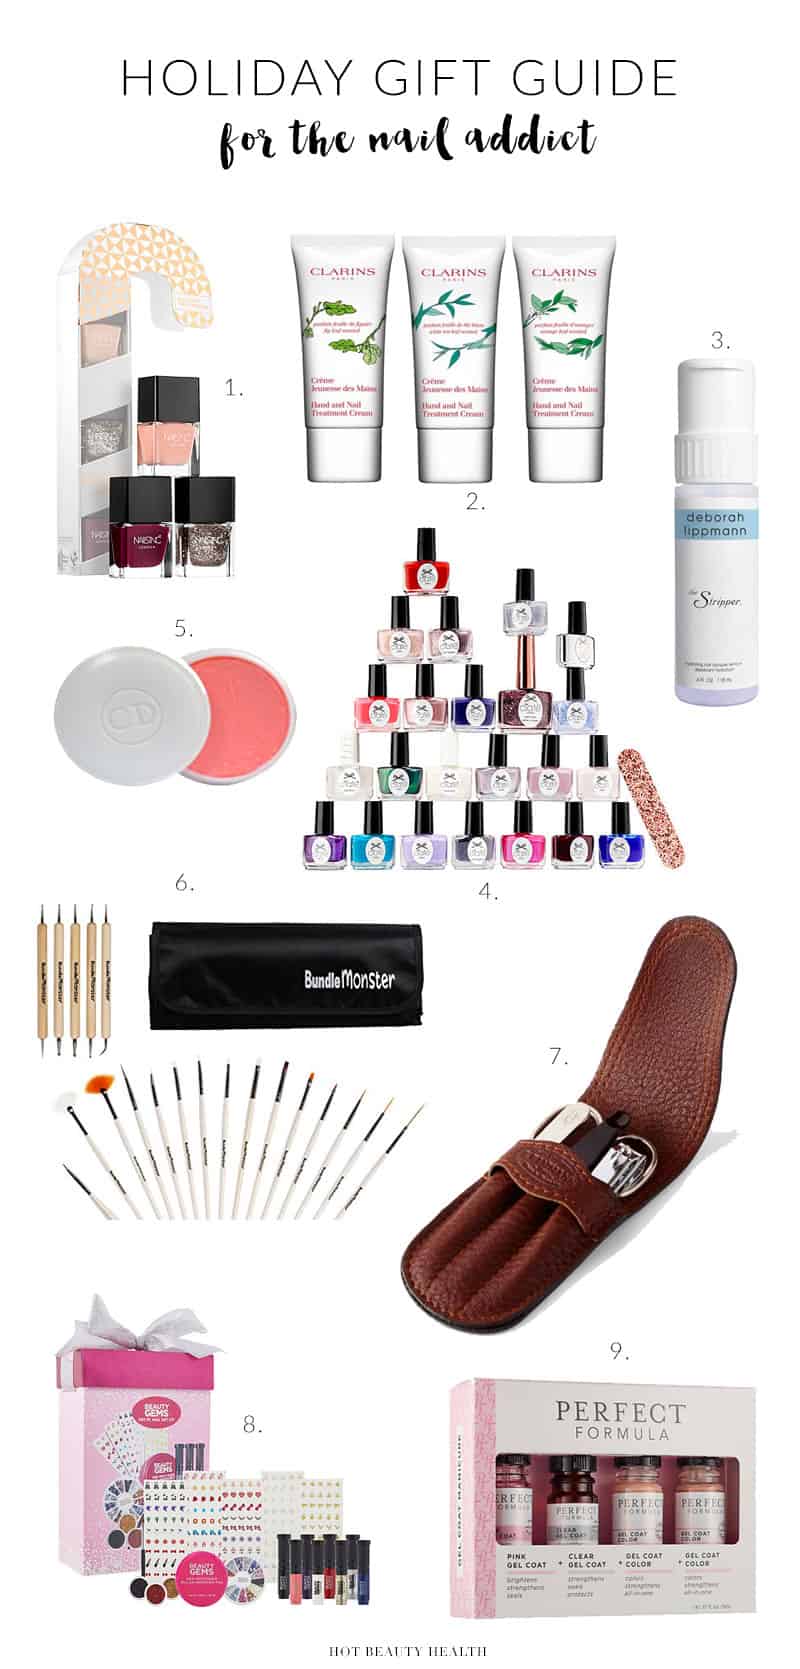 Gift guide for the nail art addict. Whether it’s your girlfriend, sister, mom, or coworker, my gift guide has something for everyone from nail polish collection sets to hand creams. See my gift list!